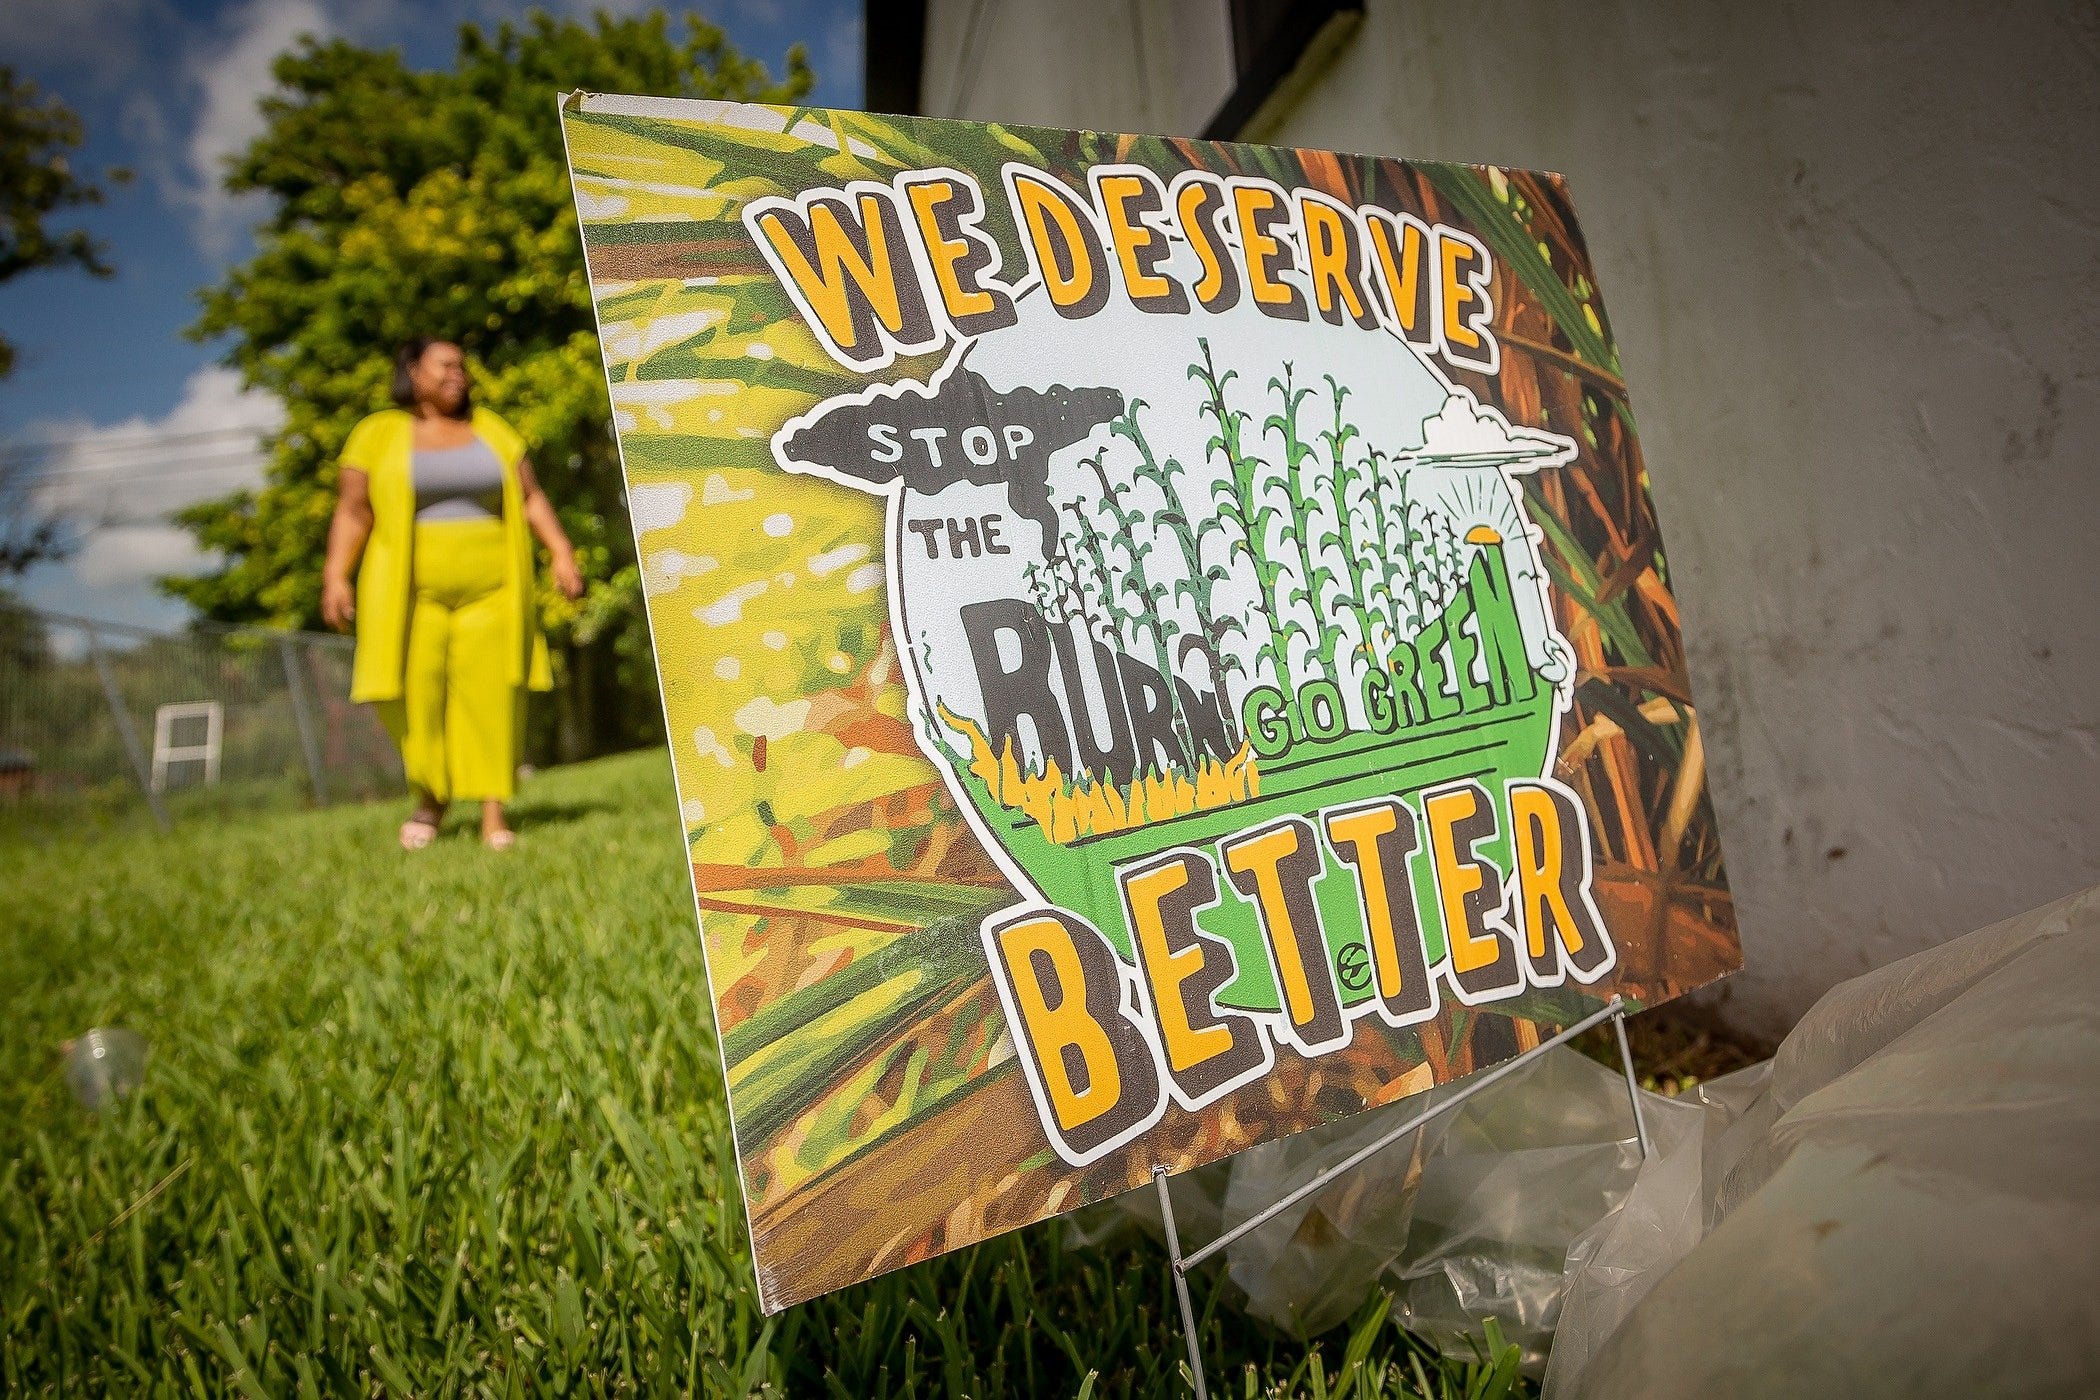 Kina Phillips has a sign protesting cane burning in the front yard of her home. She says she has given up hope that Agriculture Secretary and gubernatorial candidate Nikki Fried will make changes that spare her community from the effects of the practice.